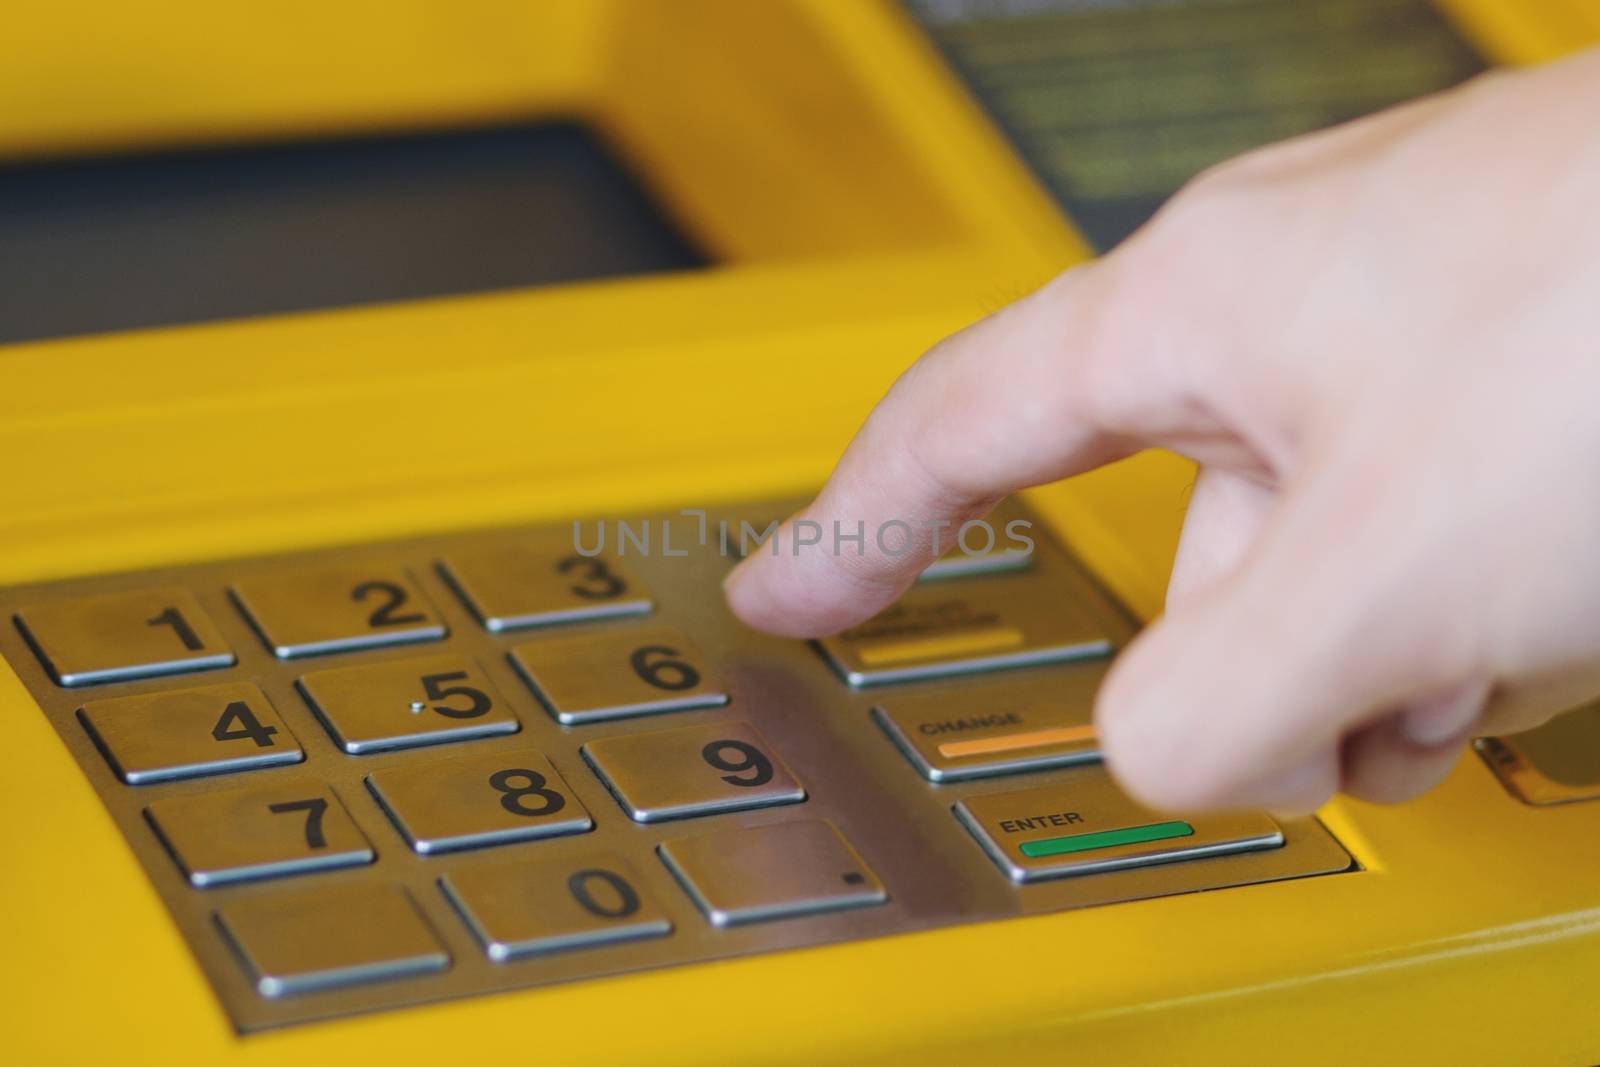 Press the money Prevent others from seeing the password. ATM machine by boytaro1428@gmail.com